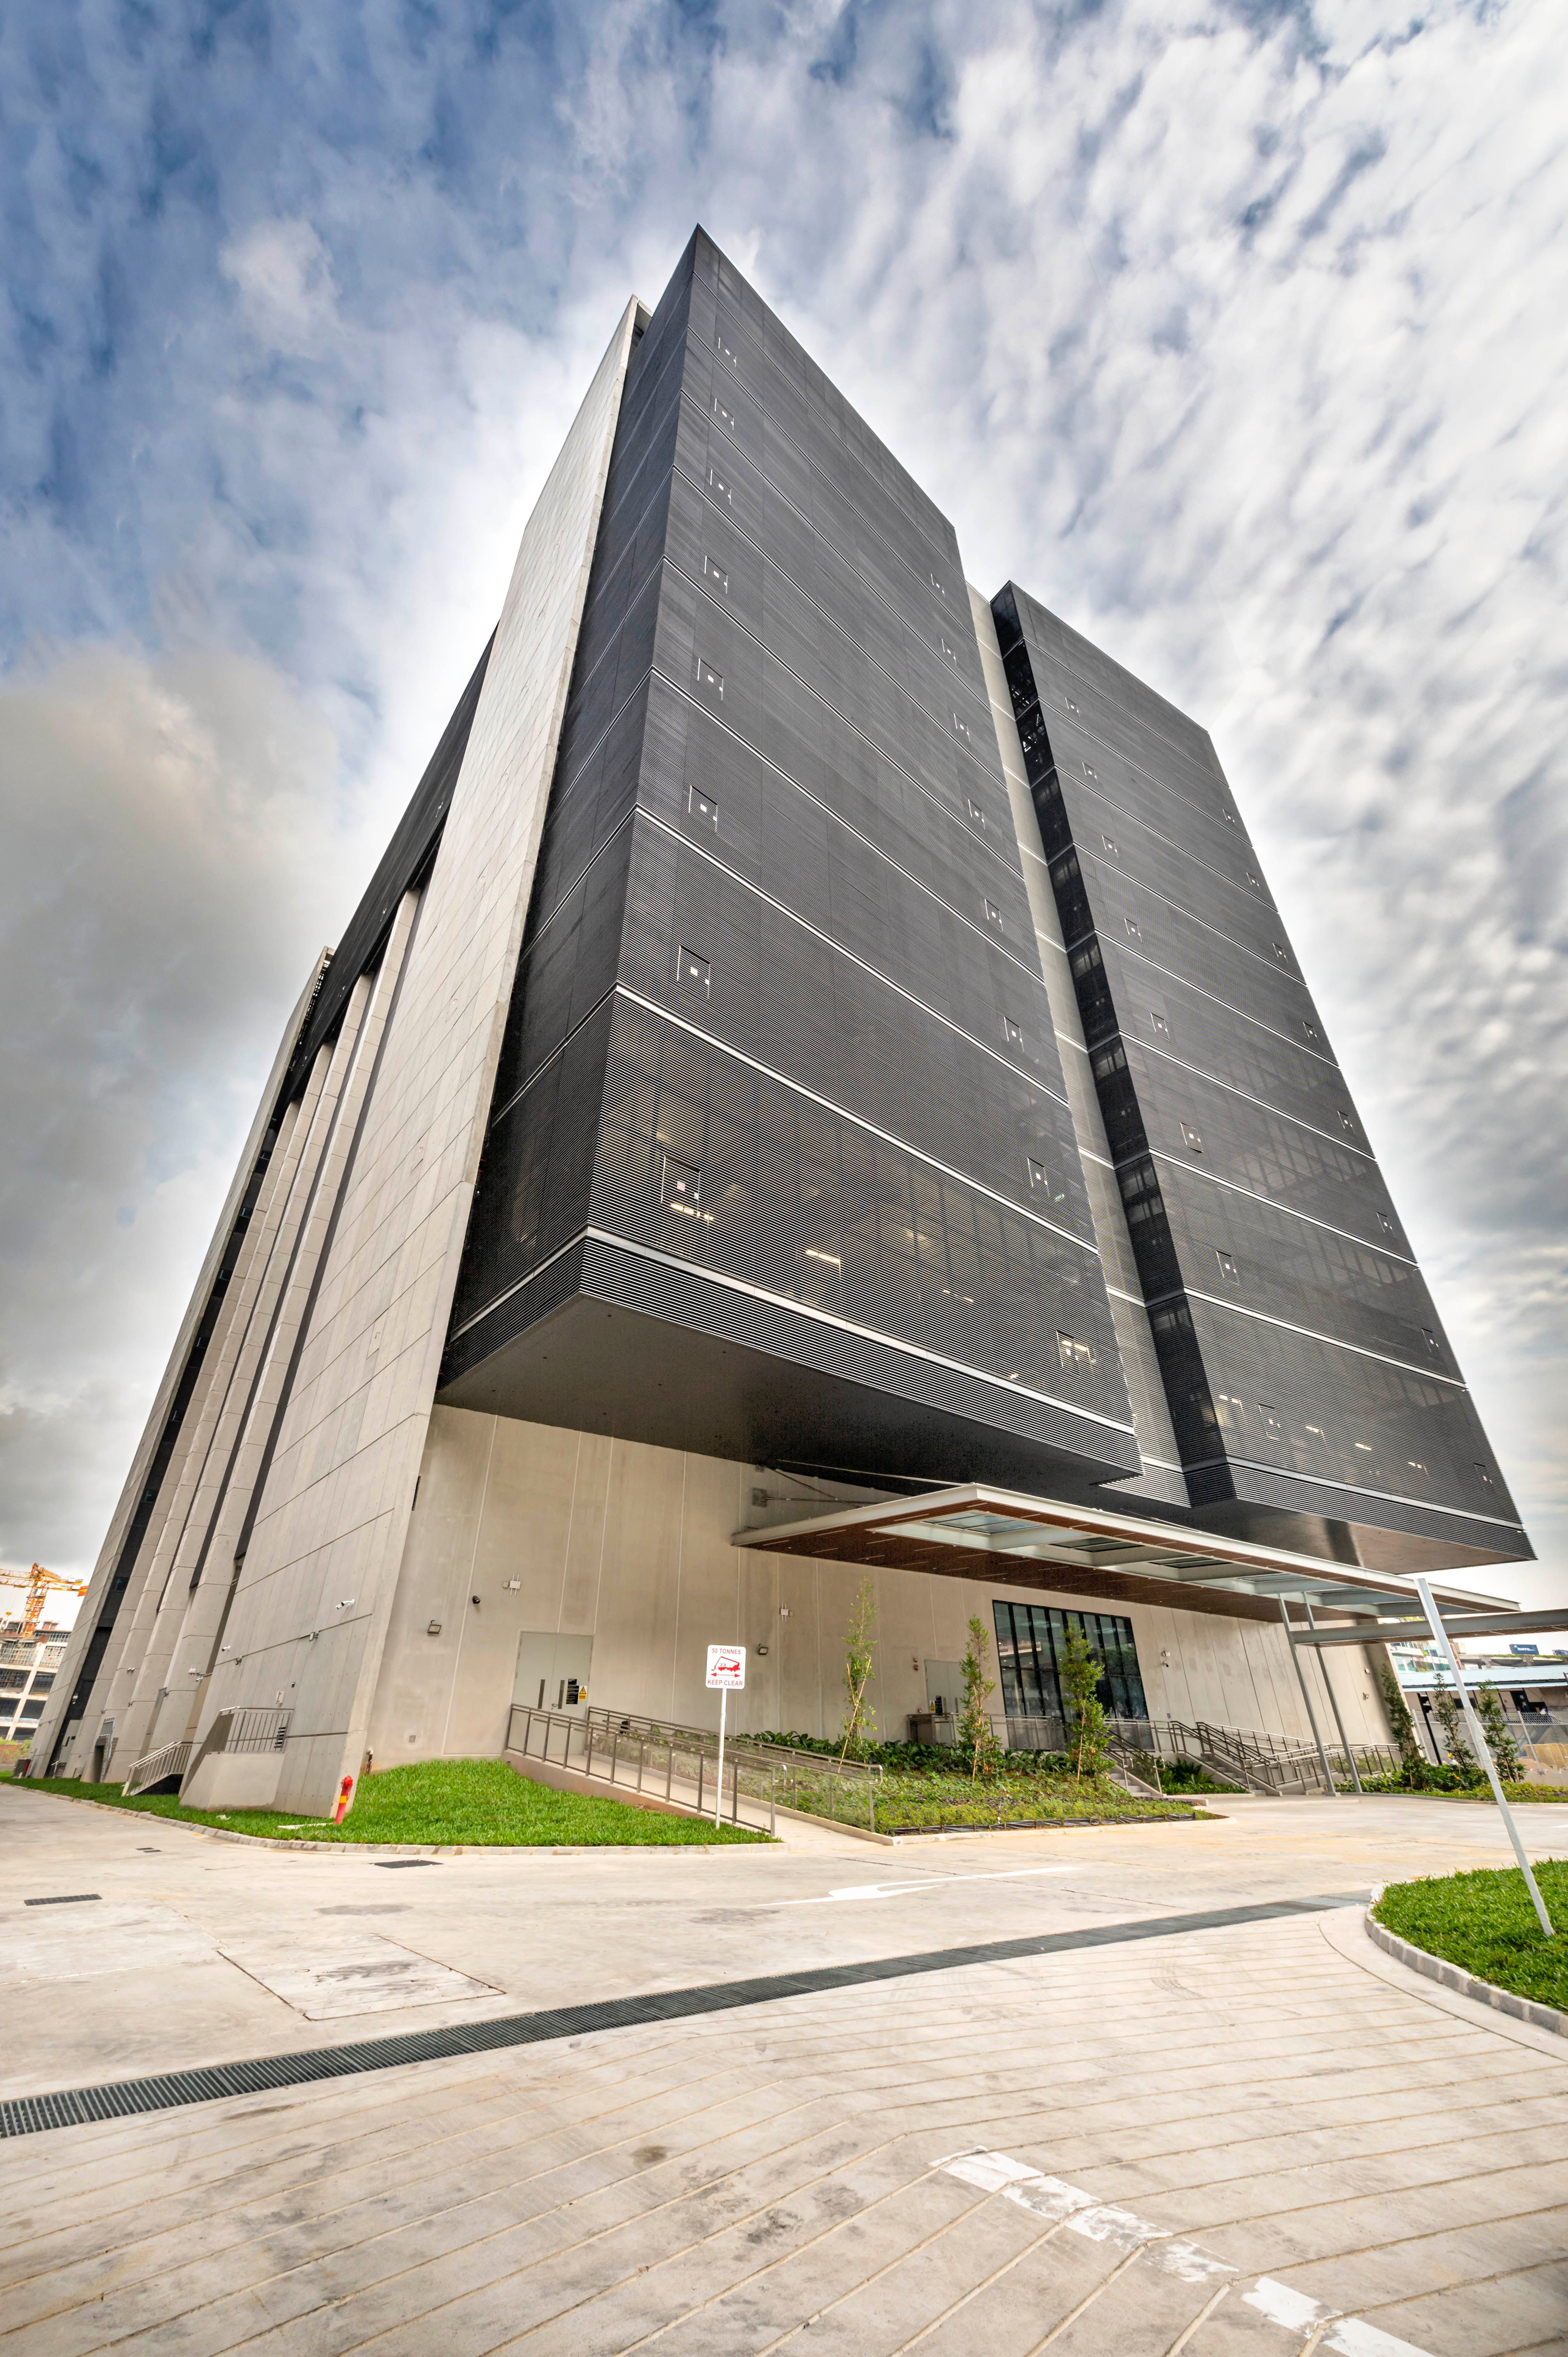 Equinix Opens Fifth Data Center in Singapore and Deepens Commitment to National Sustainability Agenda